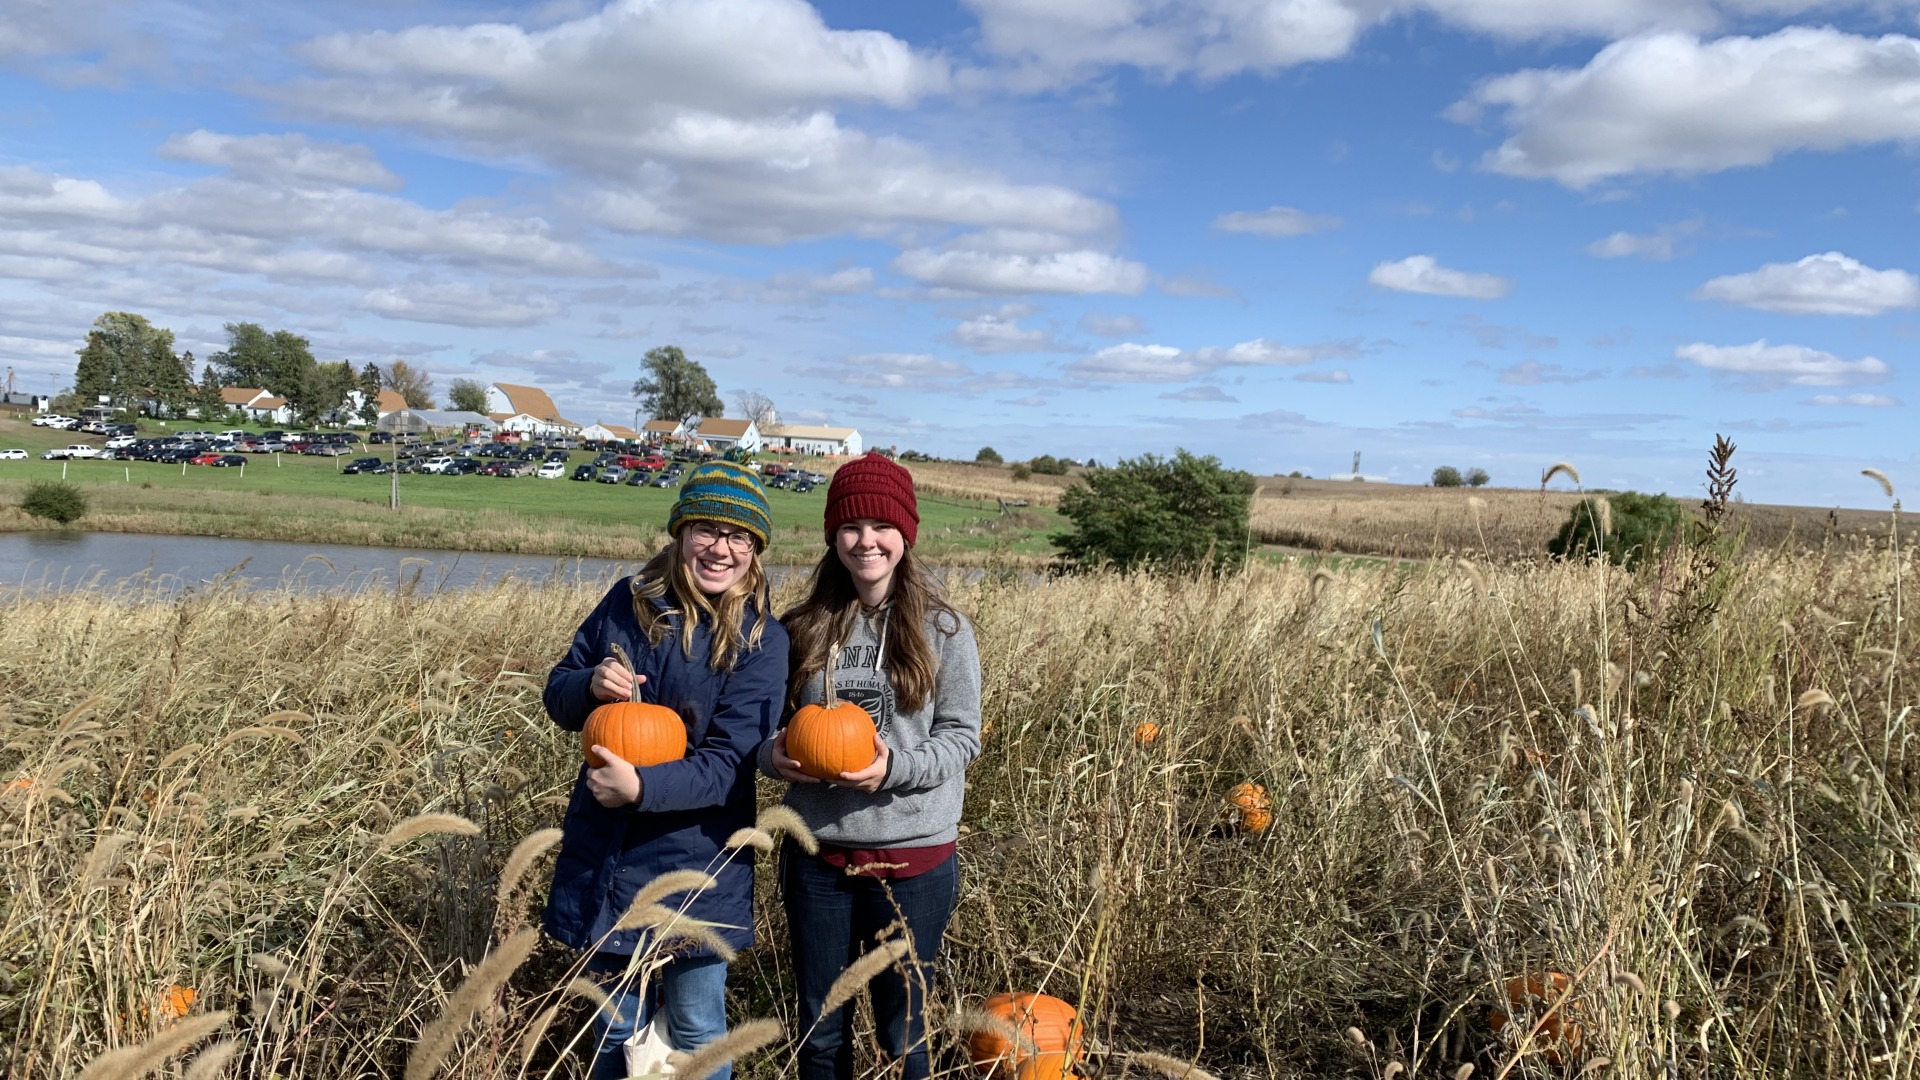 Me and Charis at the pumpkin patch, posing with our matching pumpkins